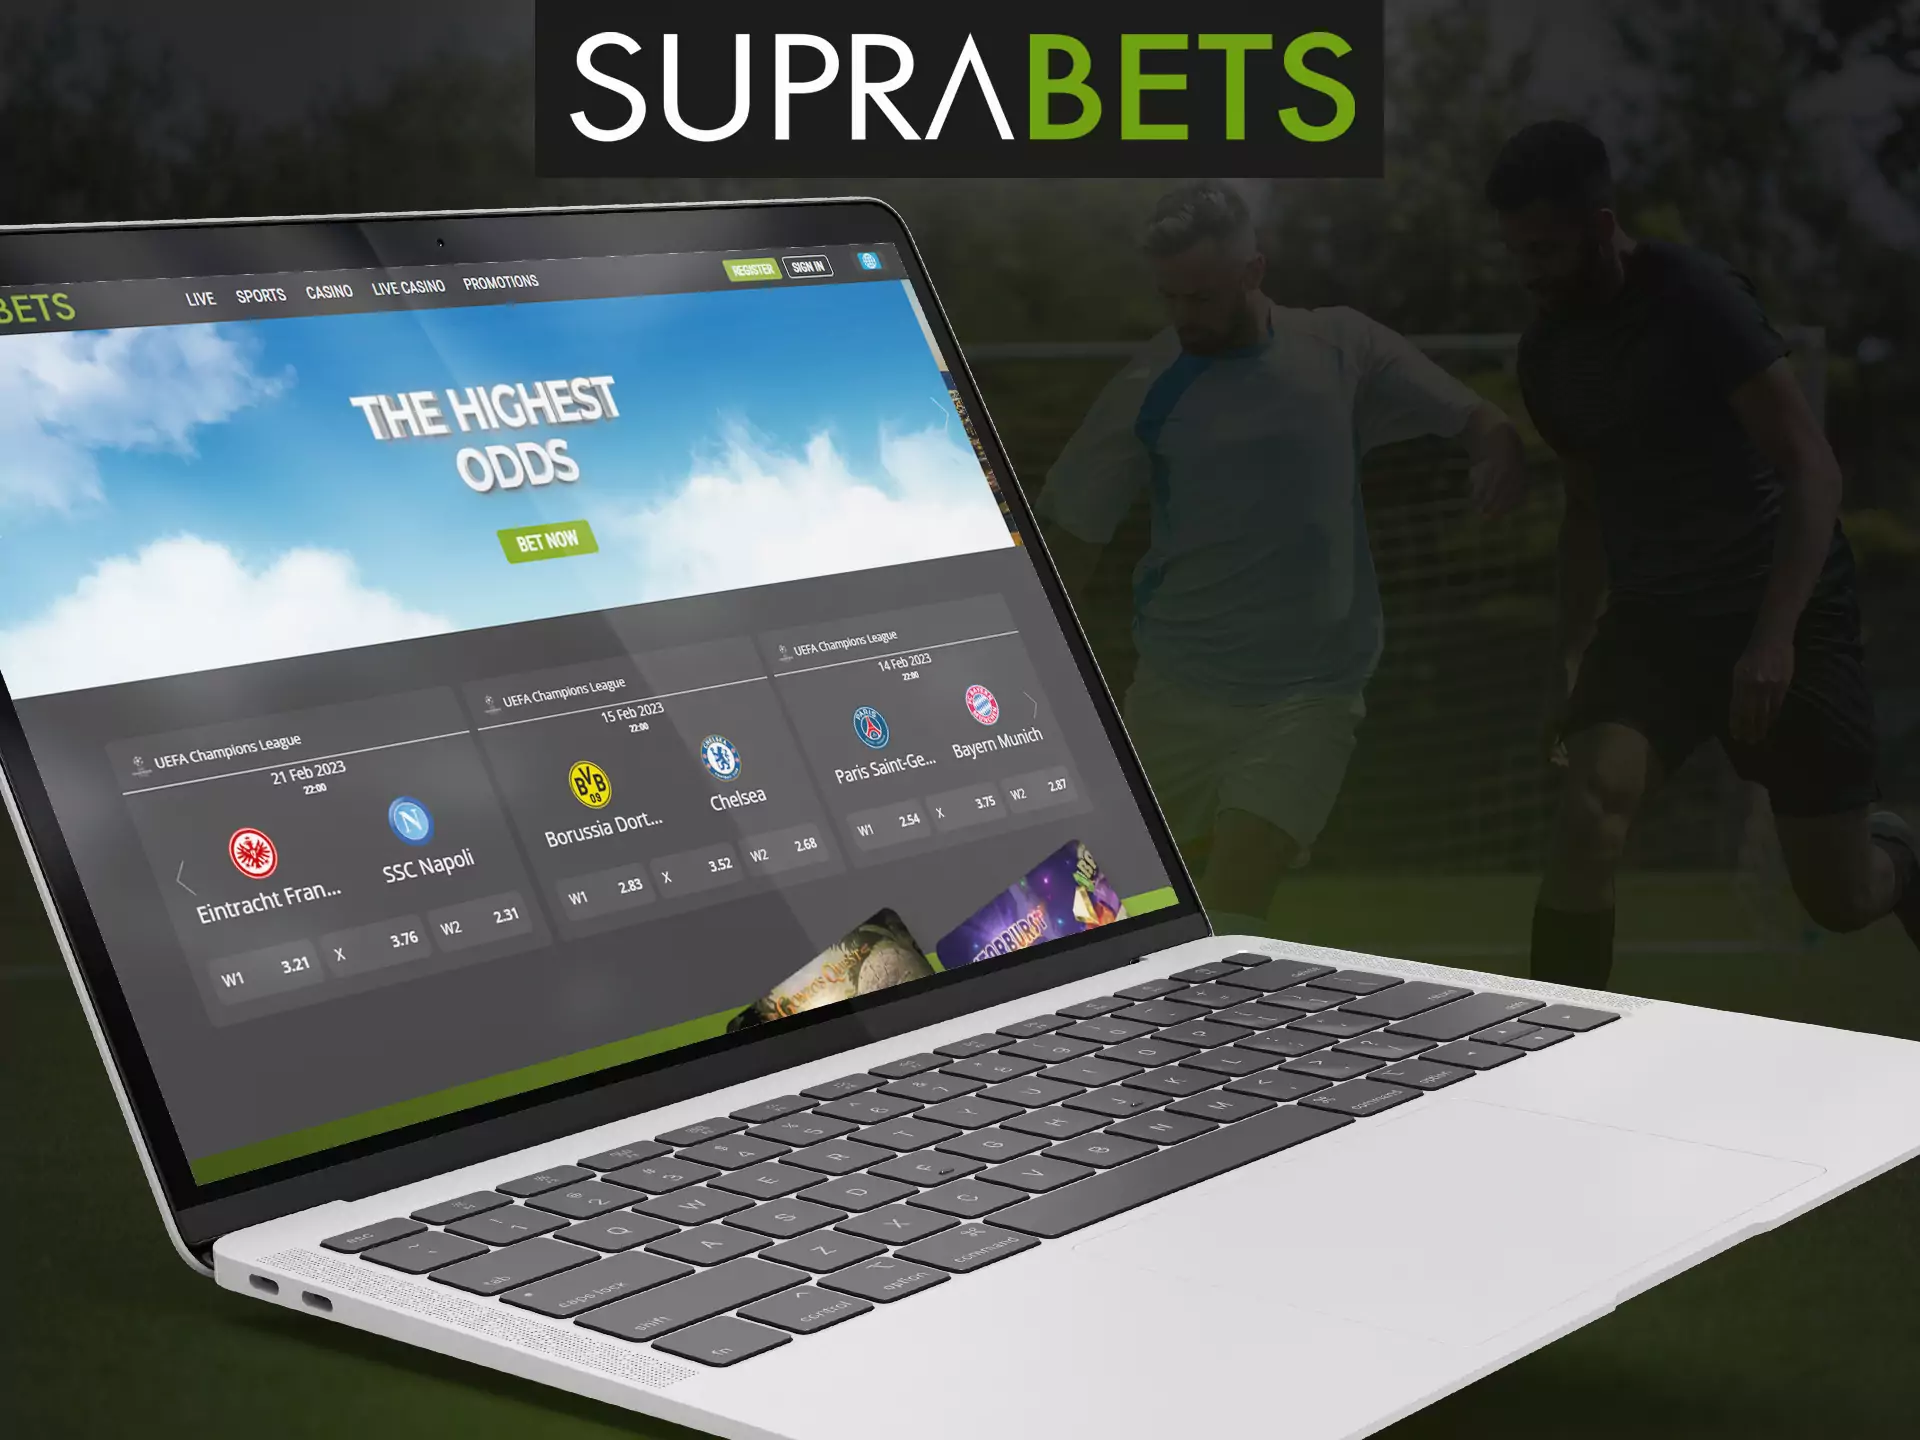 Play your favorite games and place bets in Suprabets on your personal computer.